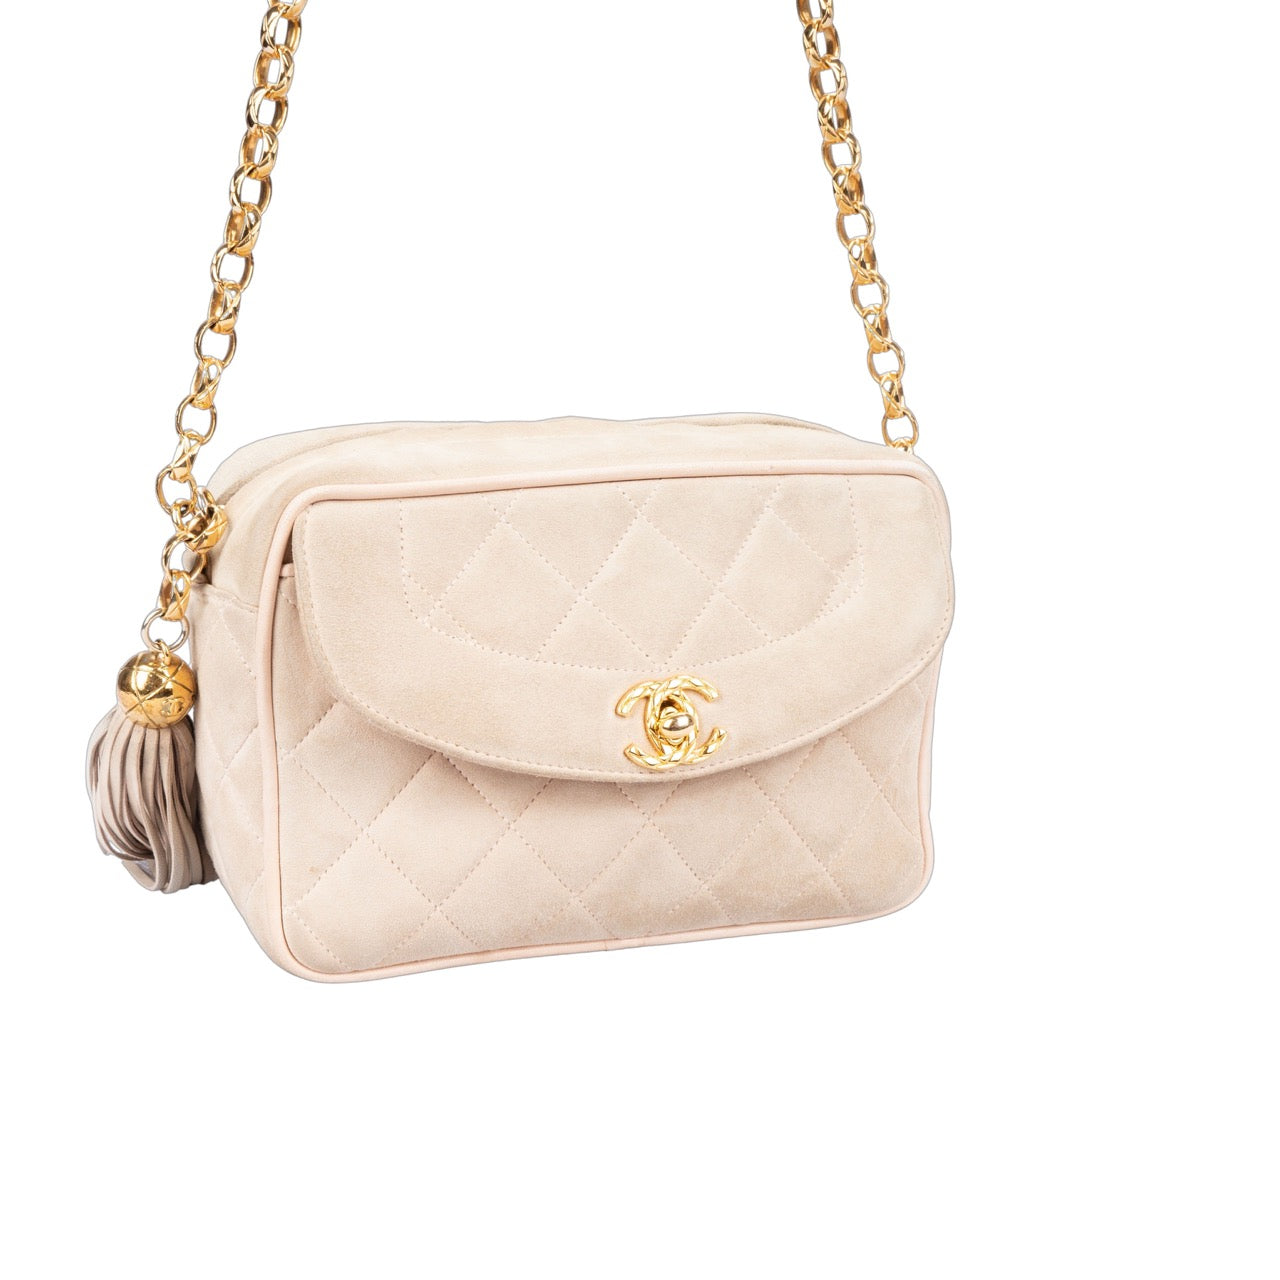 Chanel Rose Suede Leather Camera Crossbody Bag